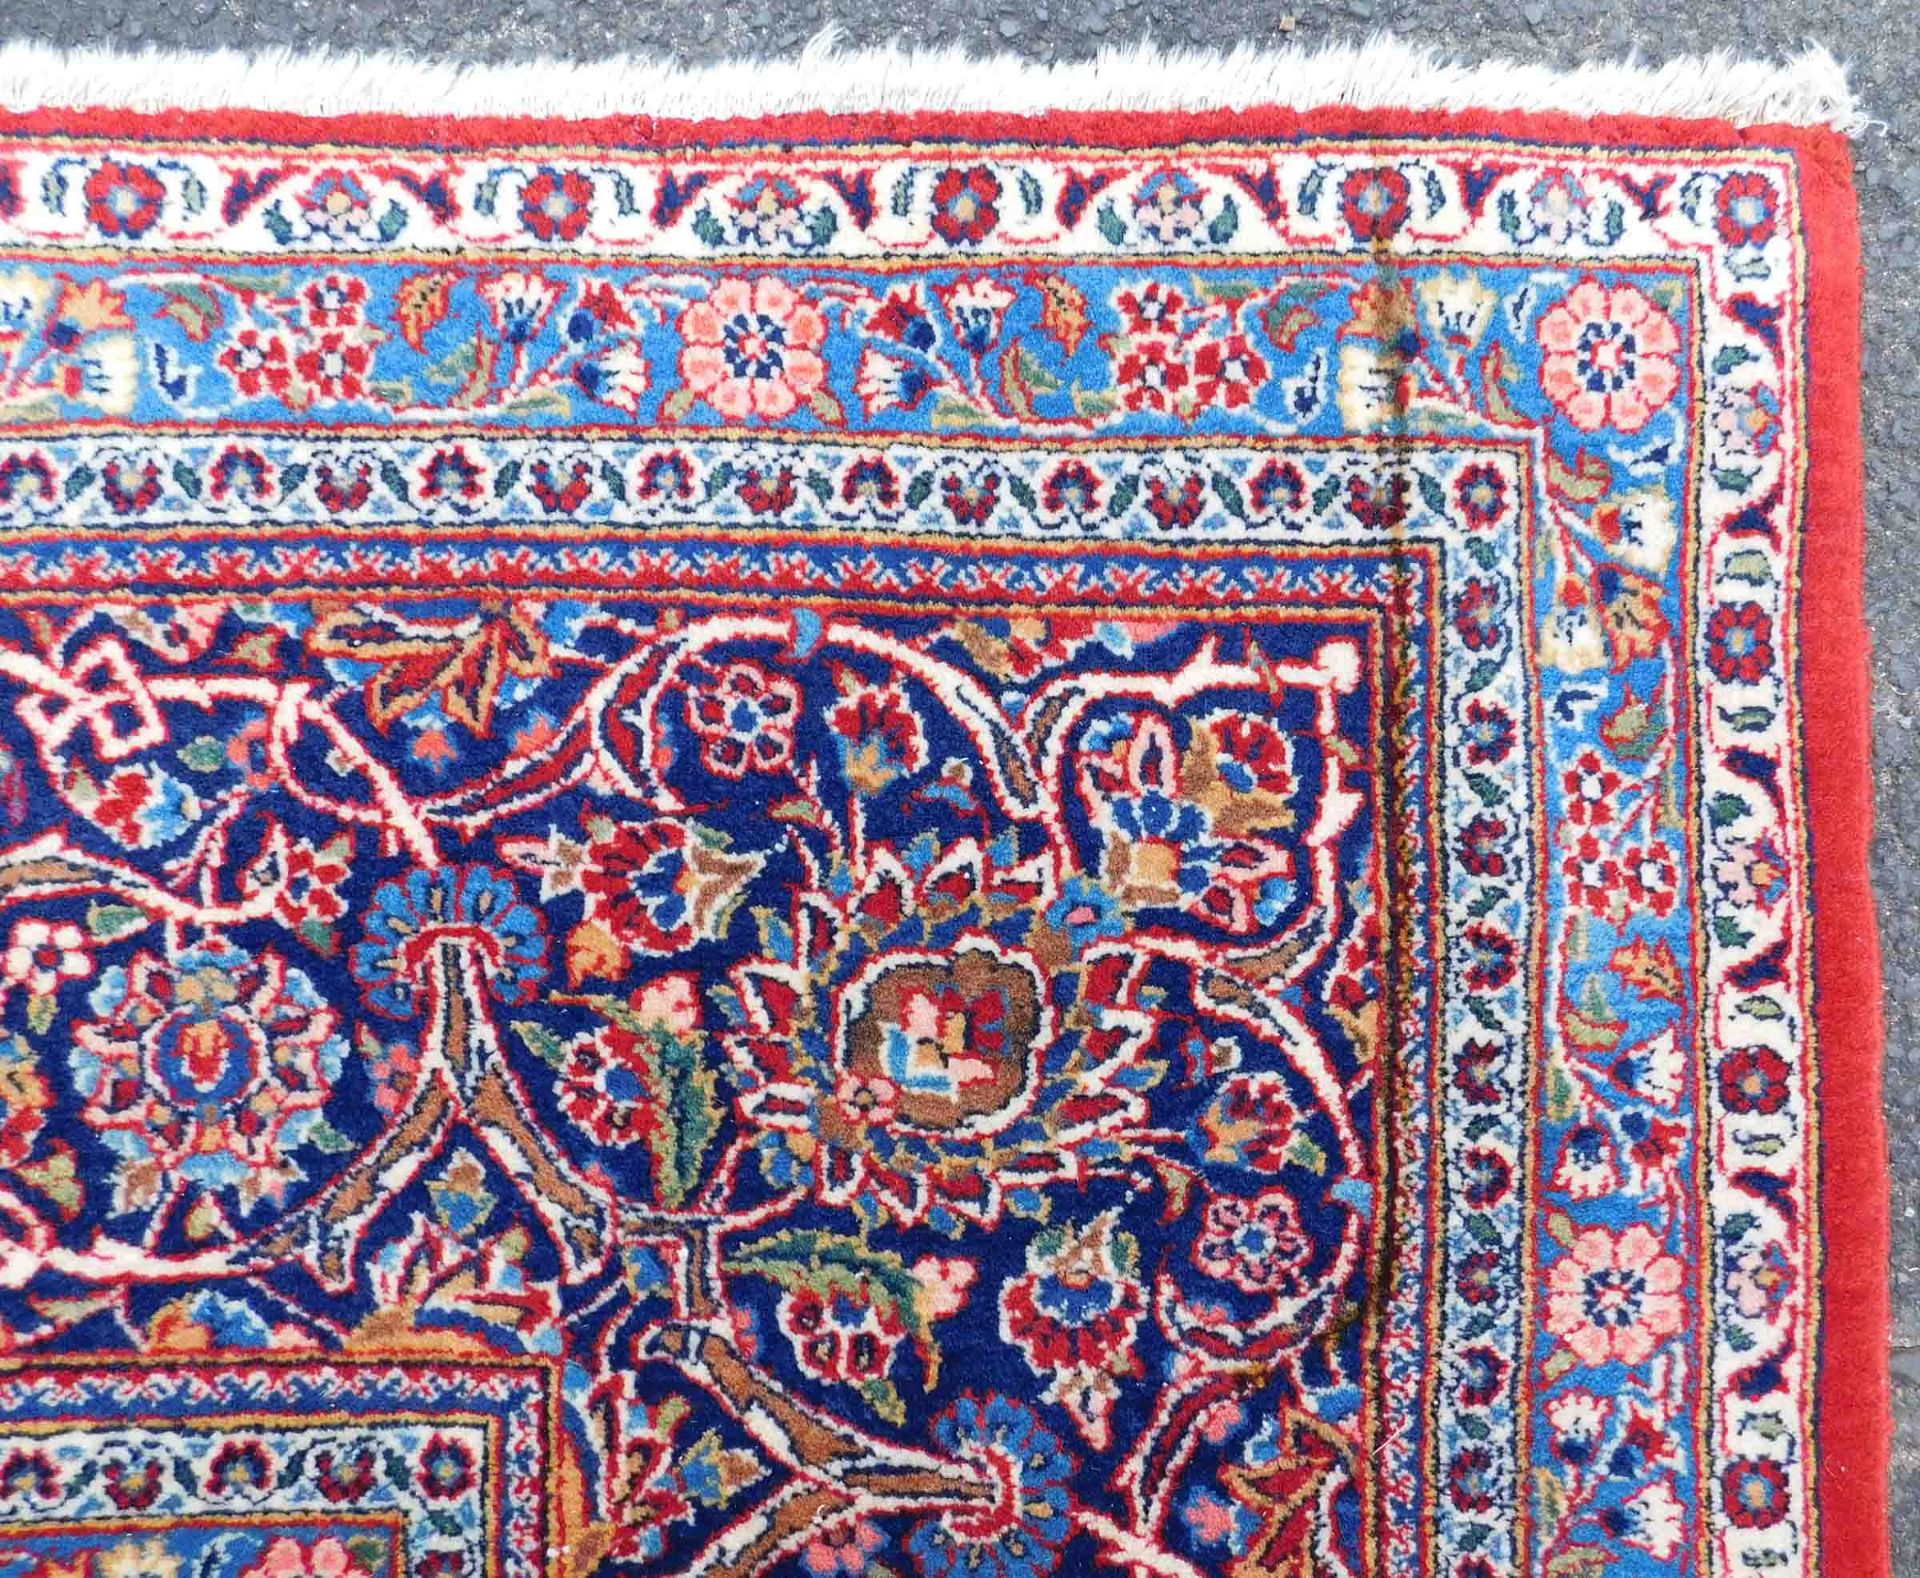 Keschan Persian carpet. Iran. Very fine weave. Cork wool.445 cm x 320 cm. Knotted by hand. Cork wool - Image 8 of 10